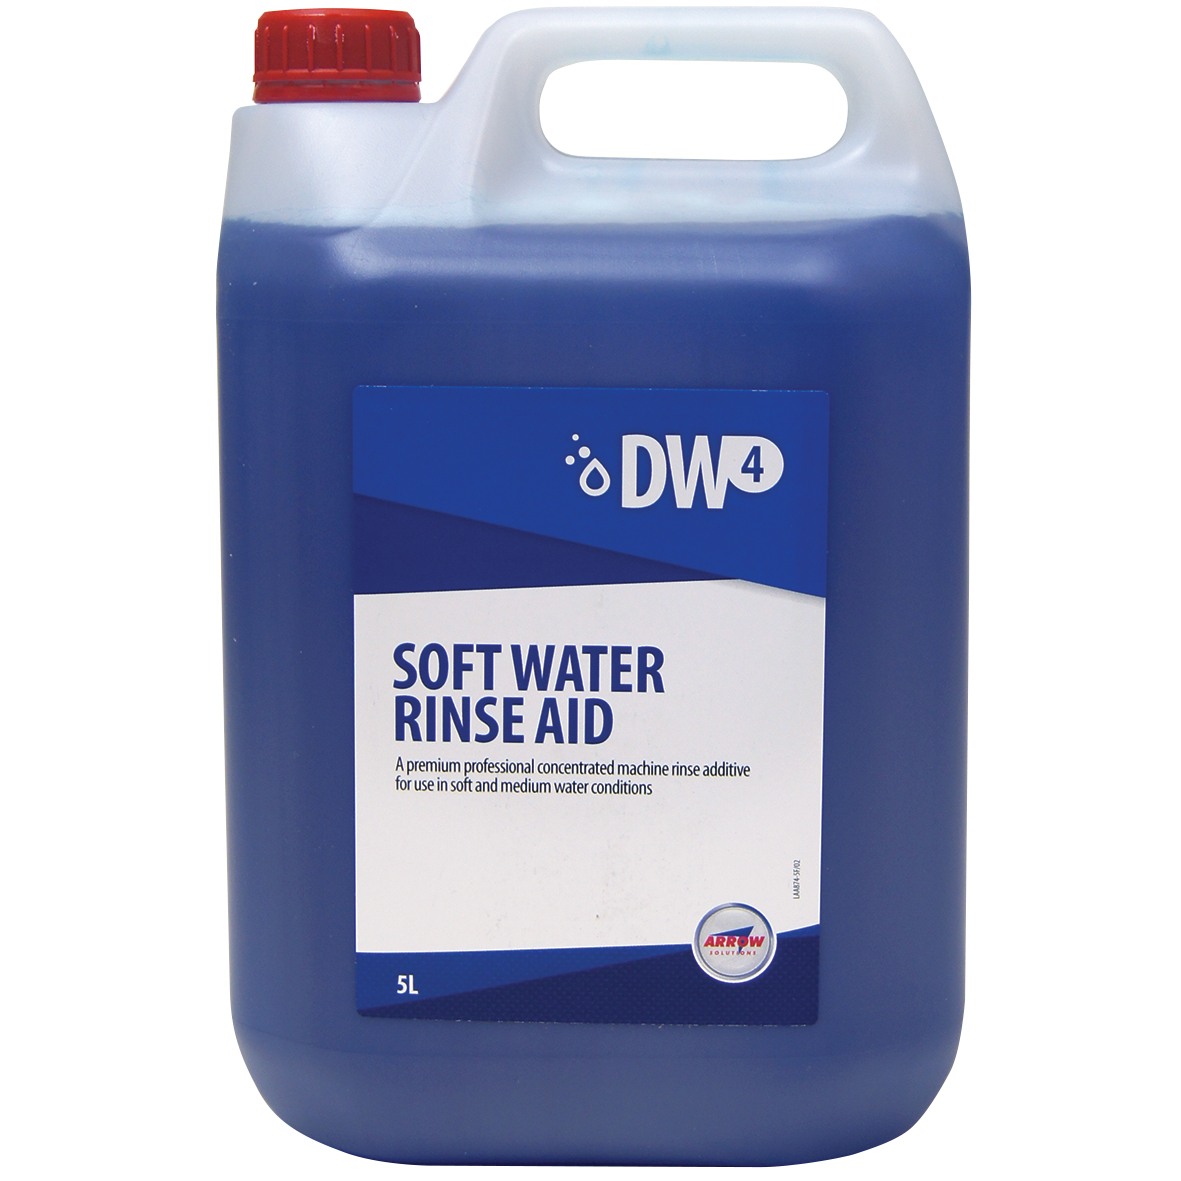 DW4 Soft Water Rinse Aid product image